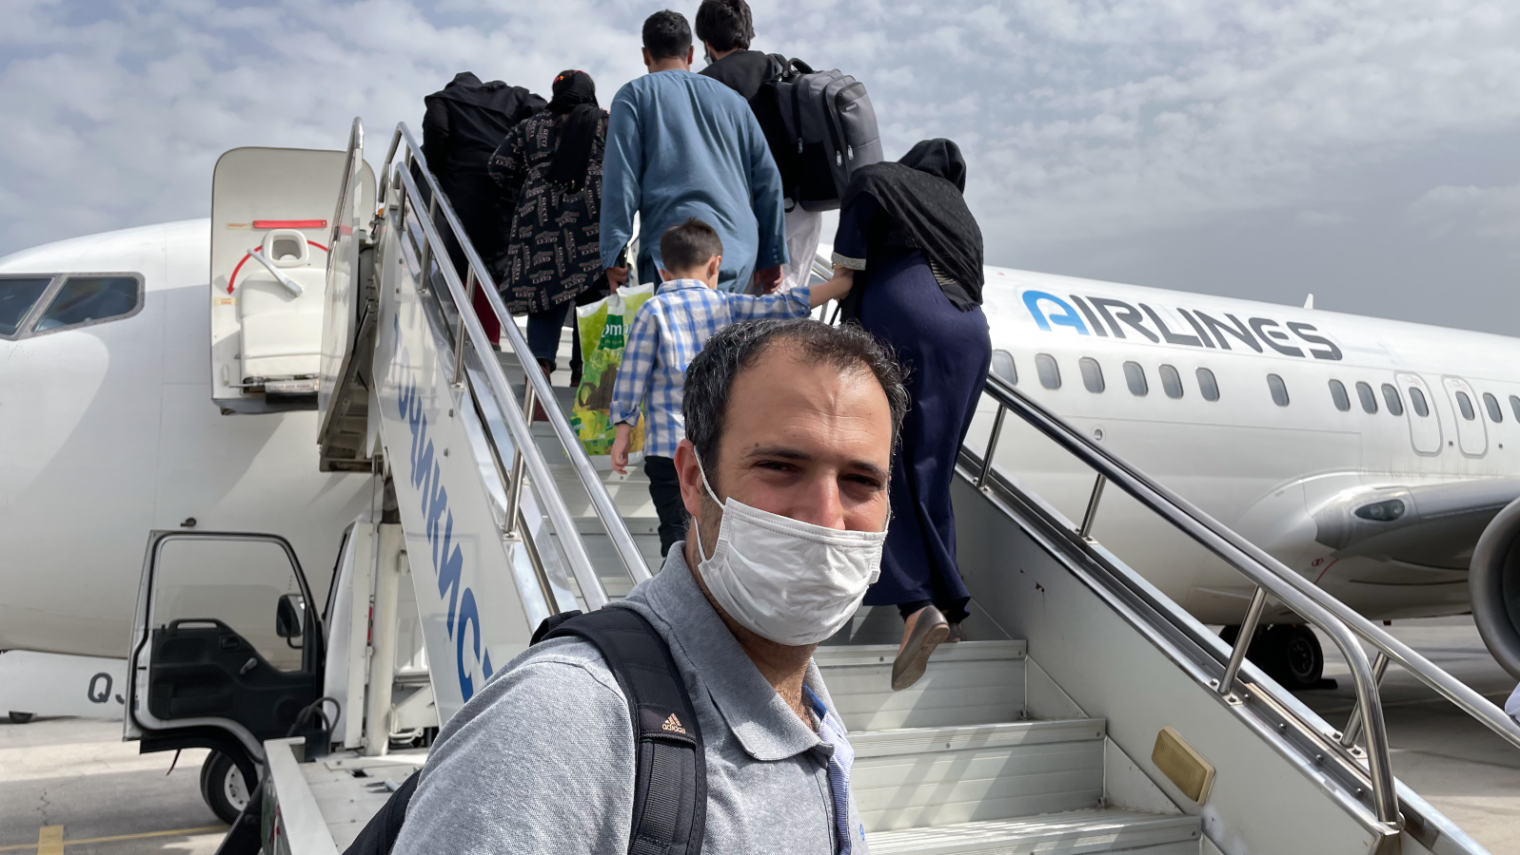 IsraAID CEO Yotam Polizer boarding the plane during the evacuation of Afghan refugees in 2021. Photo courtesy of IsraAID